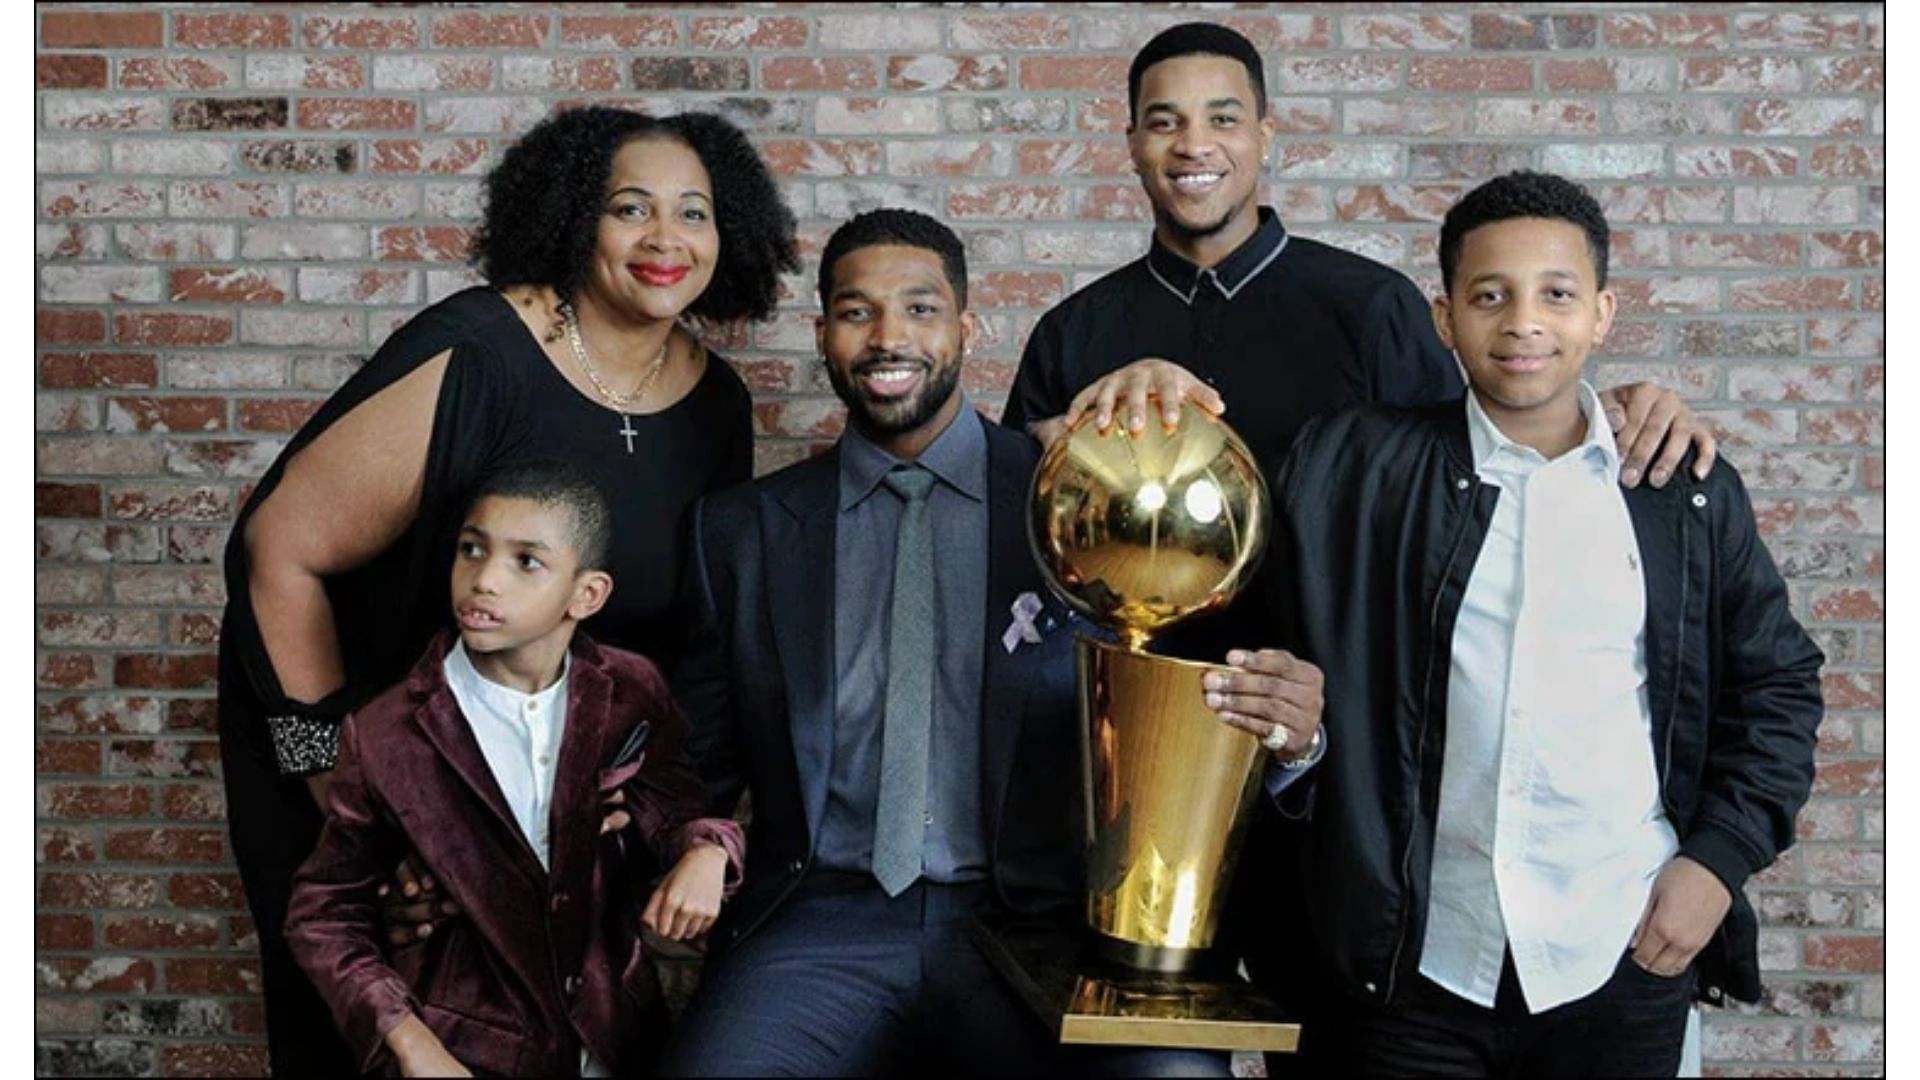 Andrea Thompson with her four sons. (Image via nba.com)